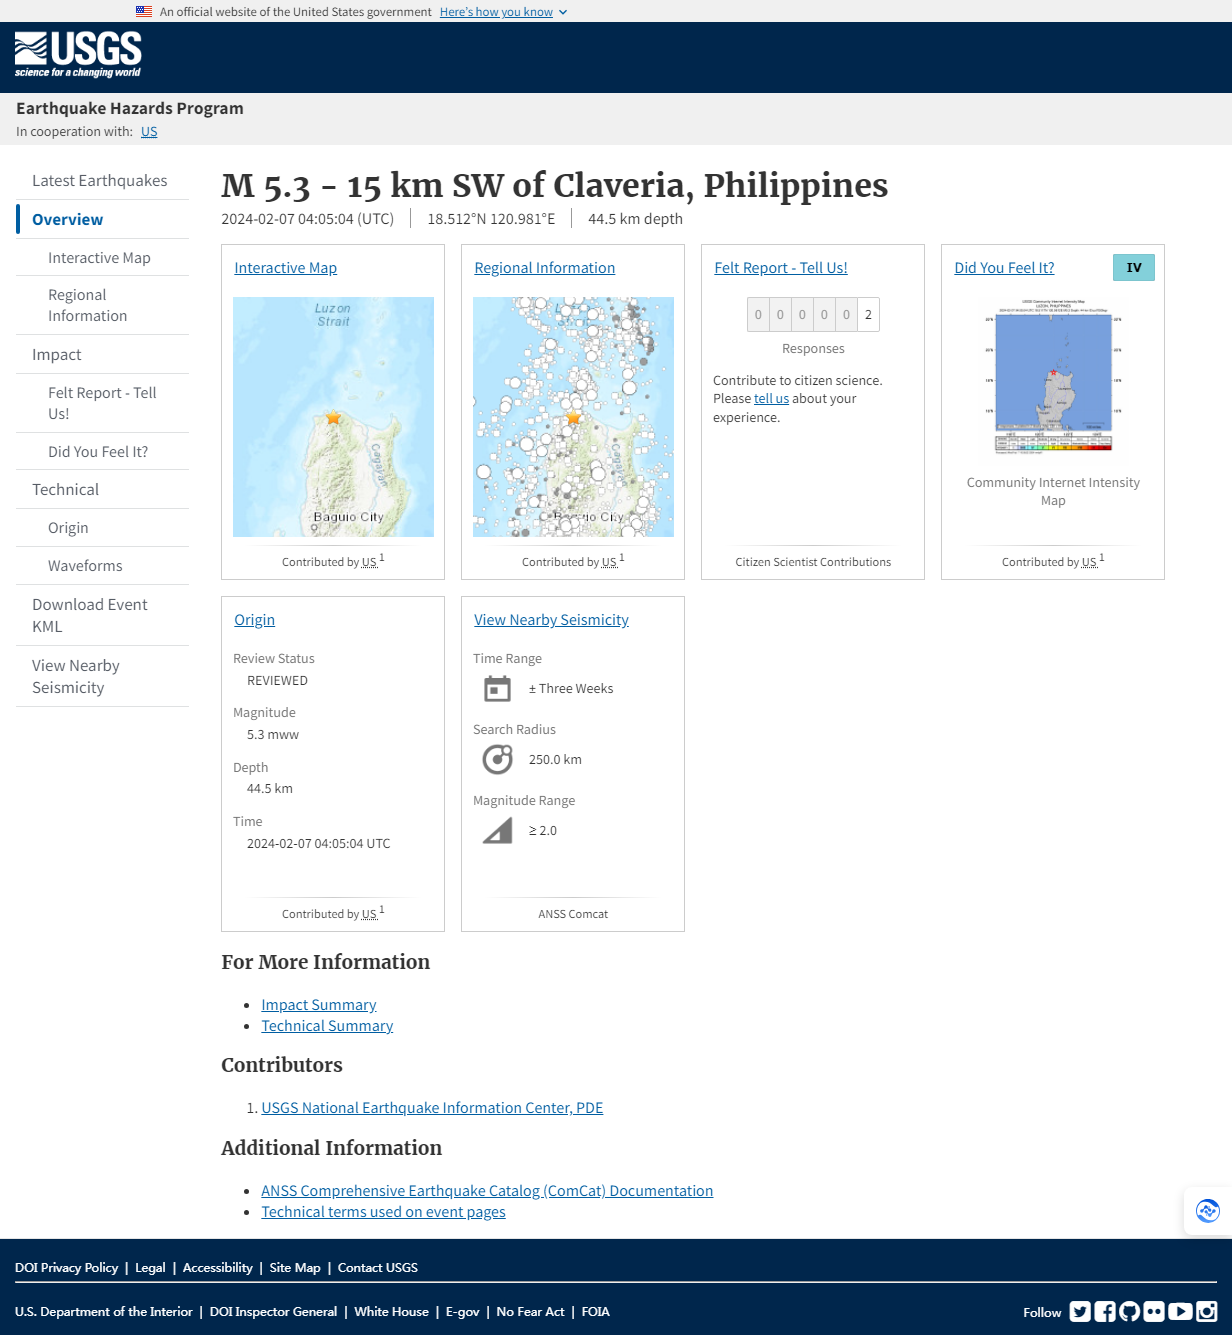 M 5.3 - 15 km SW of Claveria, Philippines.png